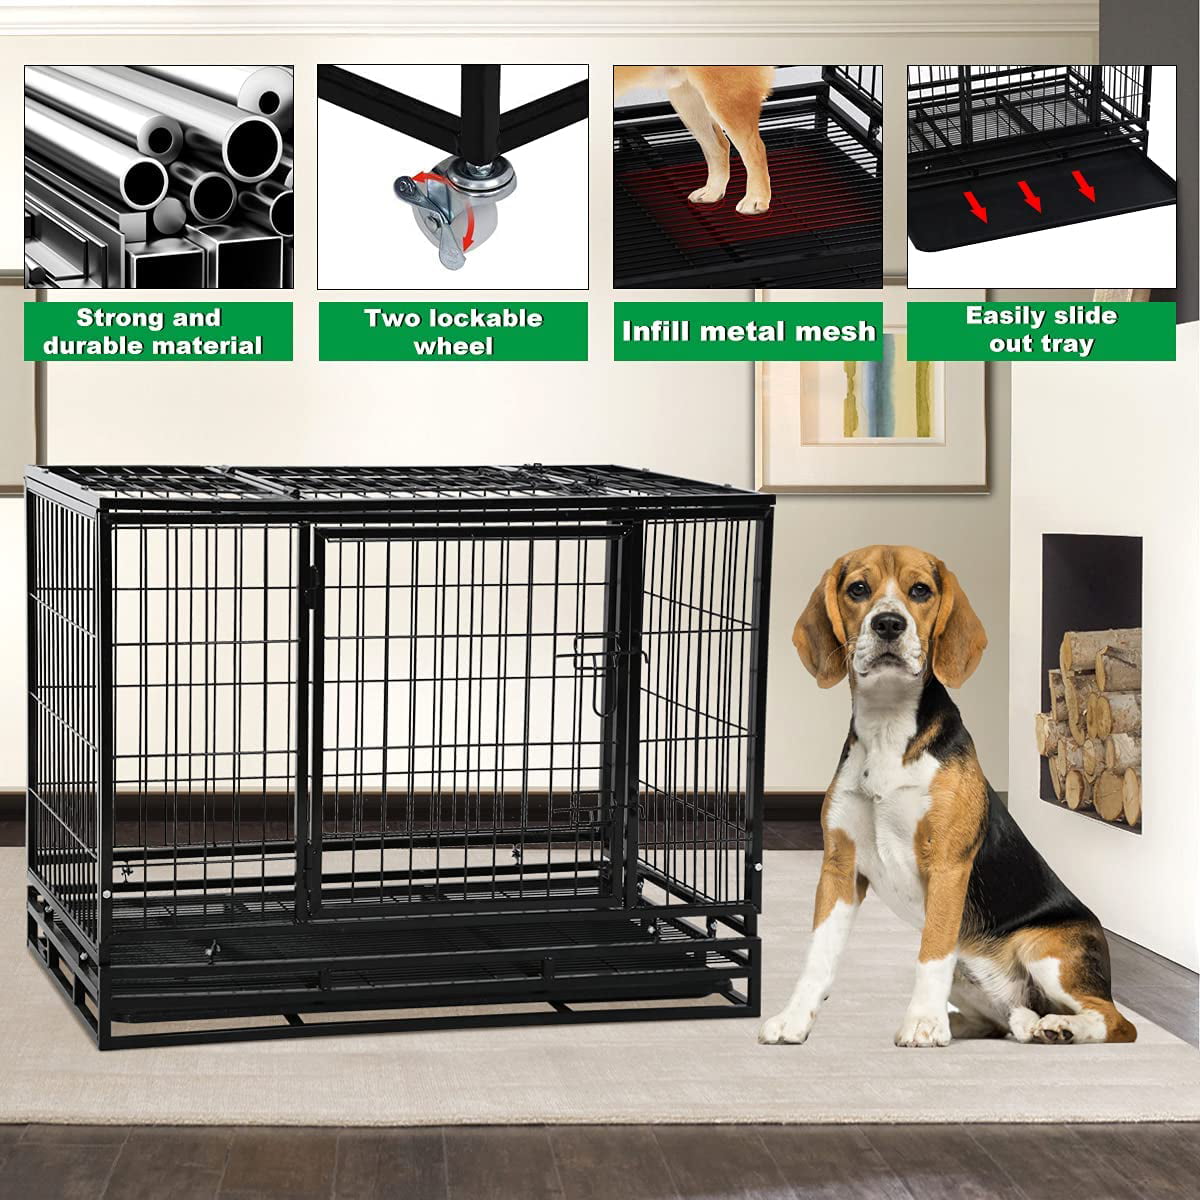 Dkelincs 42 inch Dog Cage Heavy Duty XL Dog Crate and Kennels with Wheels and Tray Dog Kennel with Double Doors for Dog Training